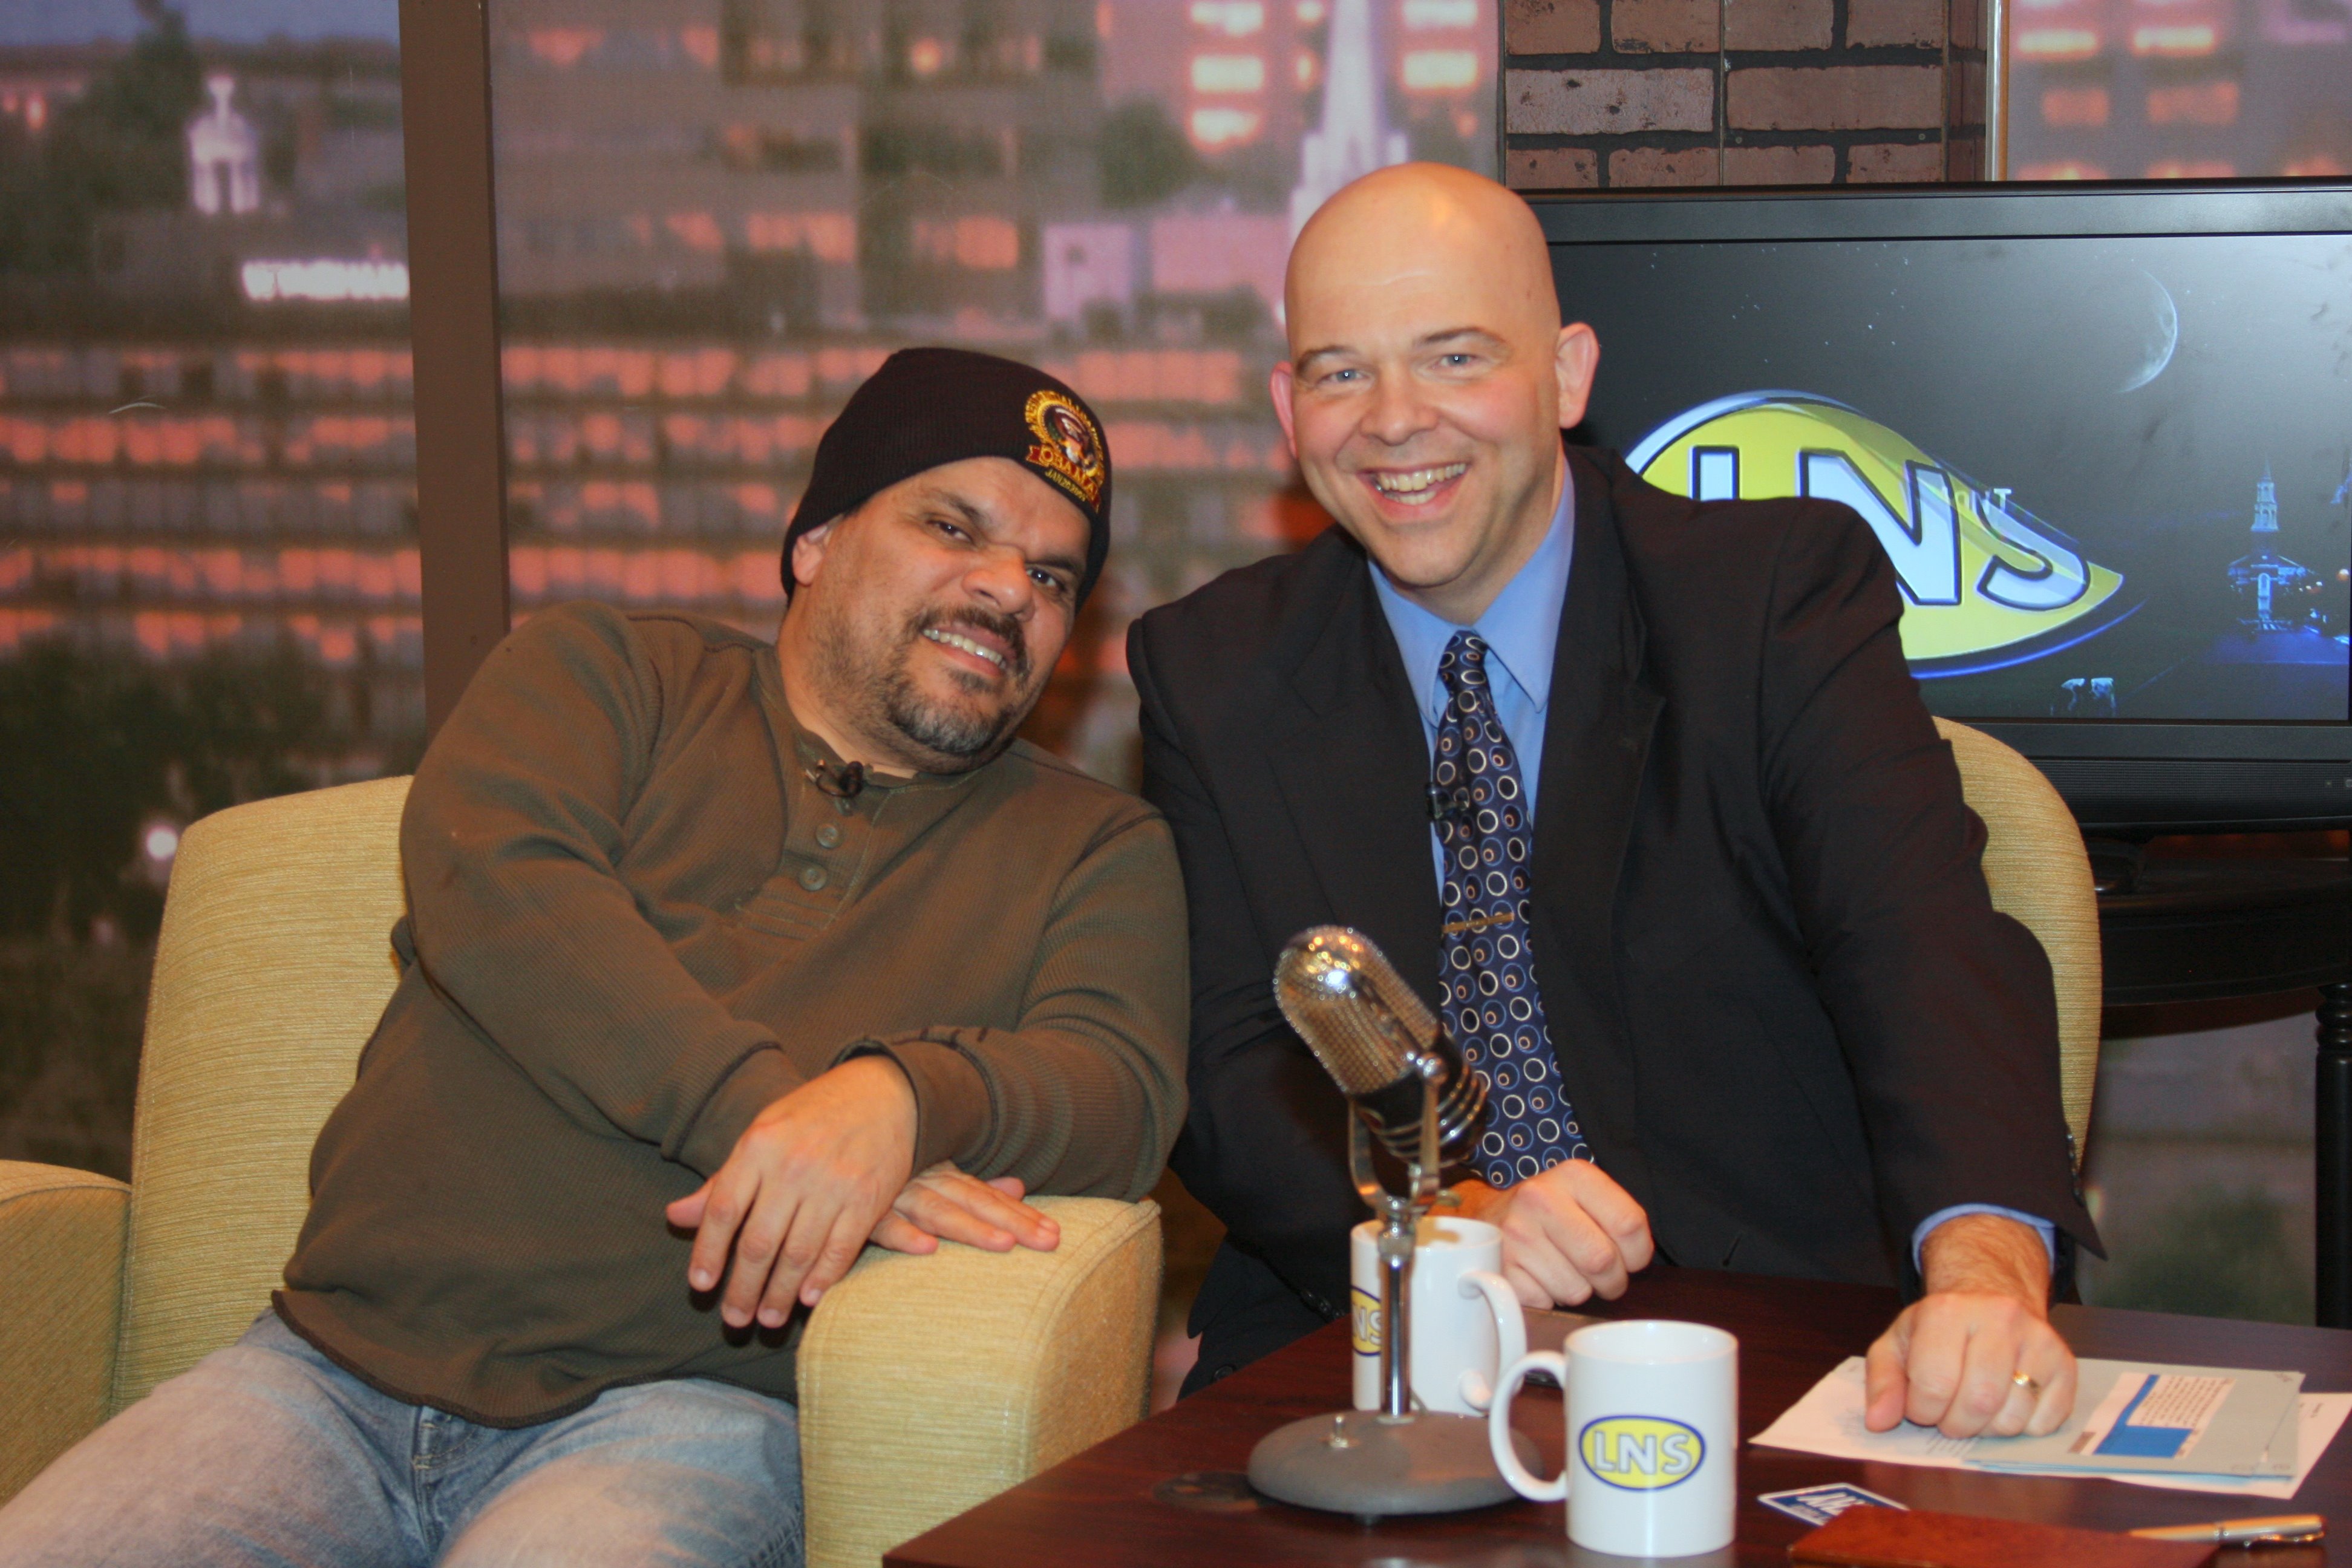 Welcoming Luis Guzman back to the show.